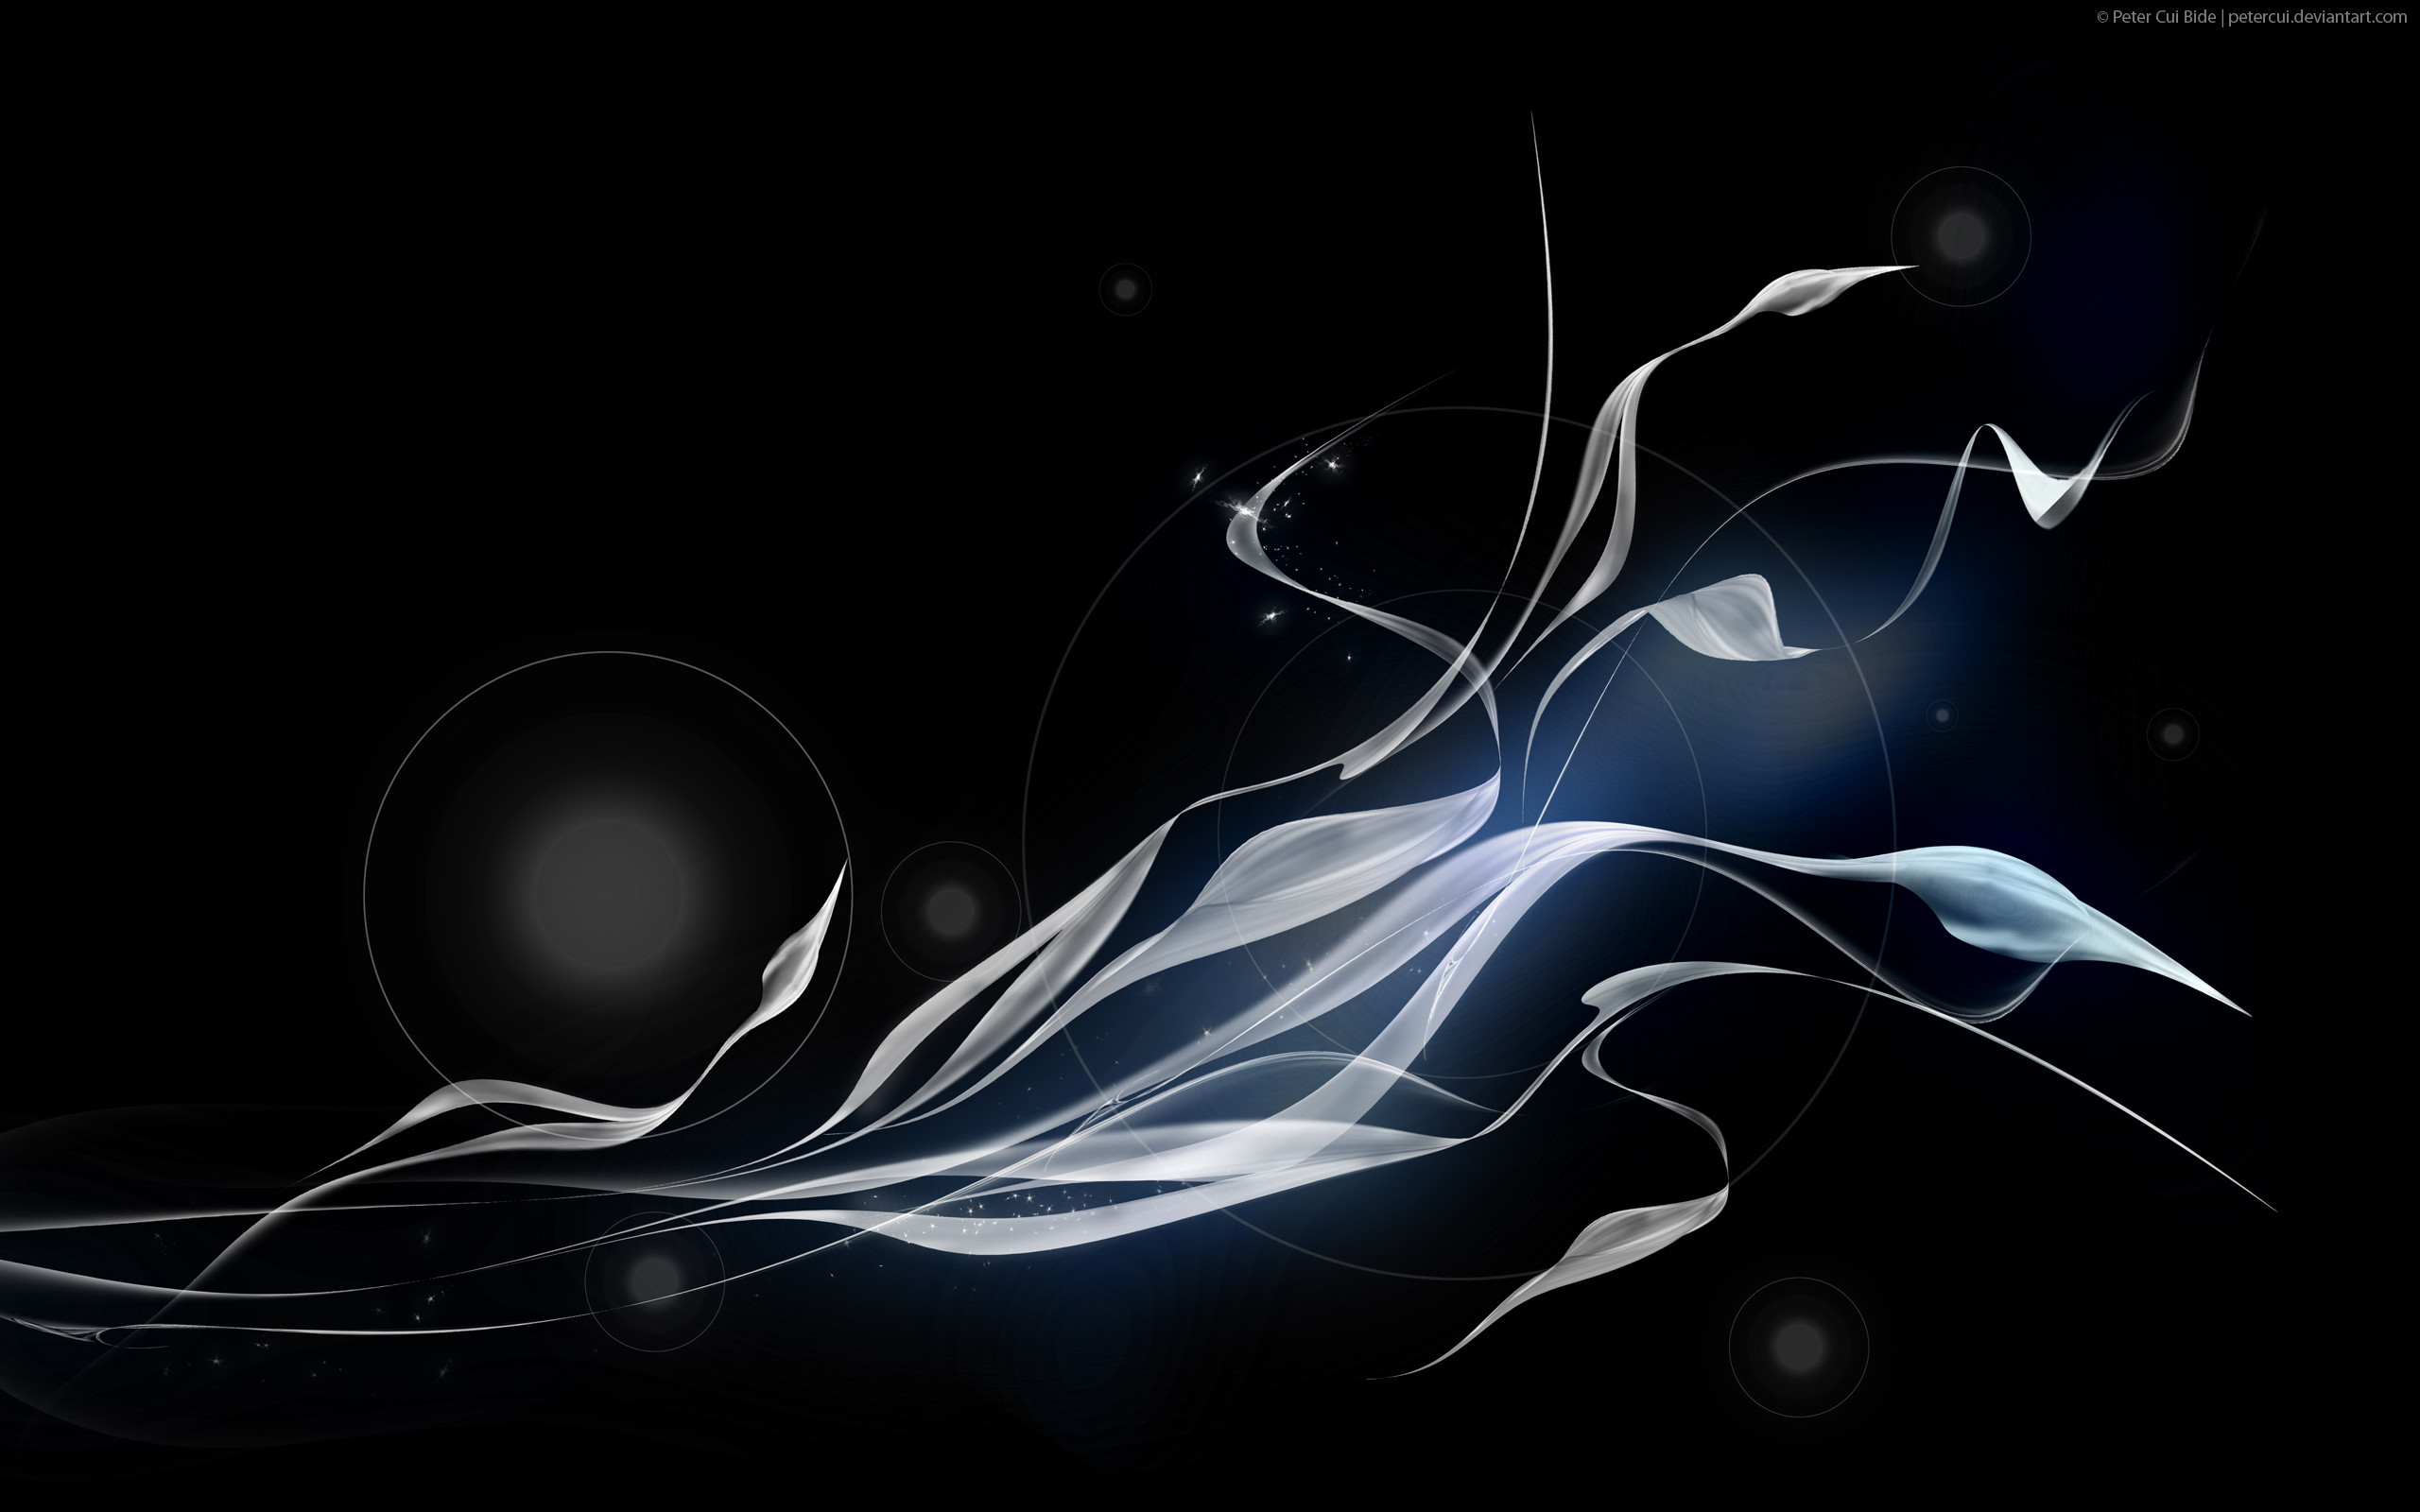 2560x1600 Download Background - Travel_9_2_Black_2560 - Free Cool Backgrounds and  Wallpapers for your Desktop Or Laptop.